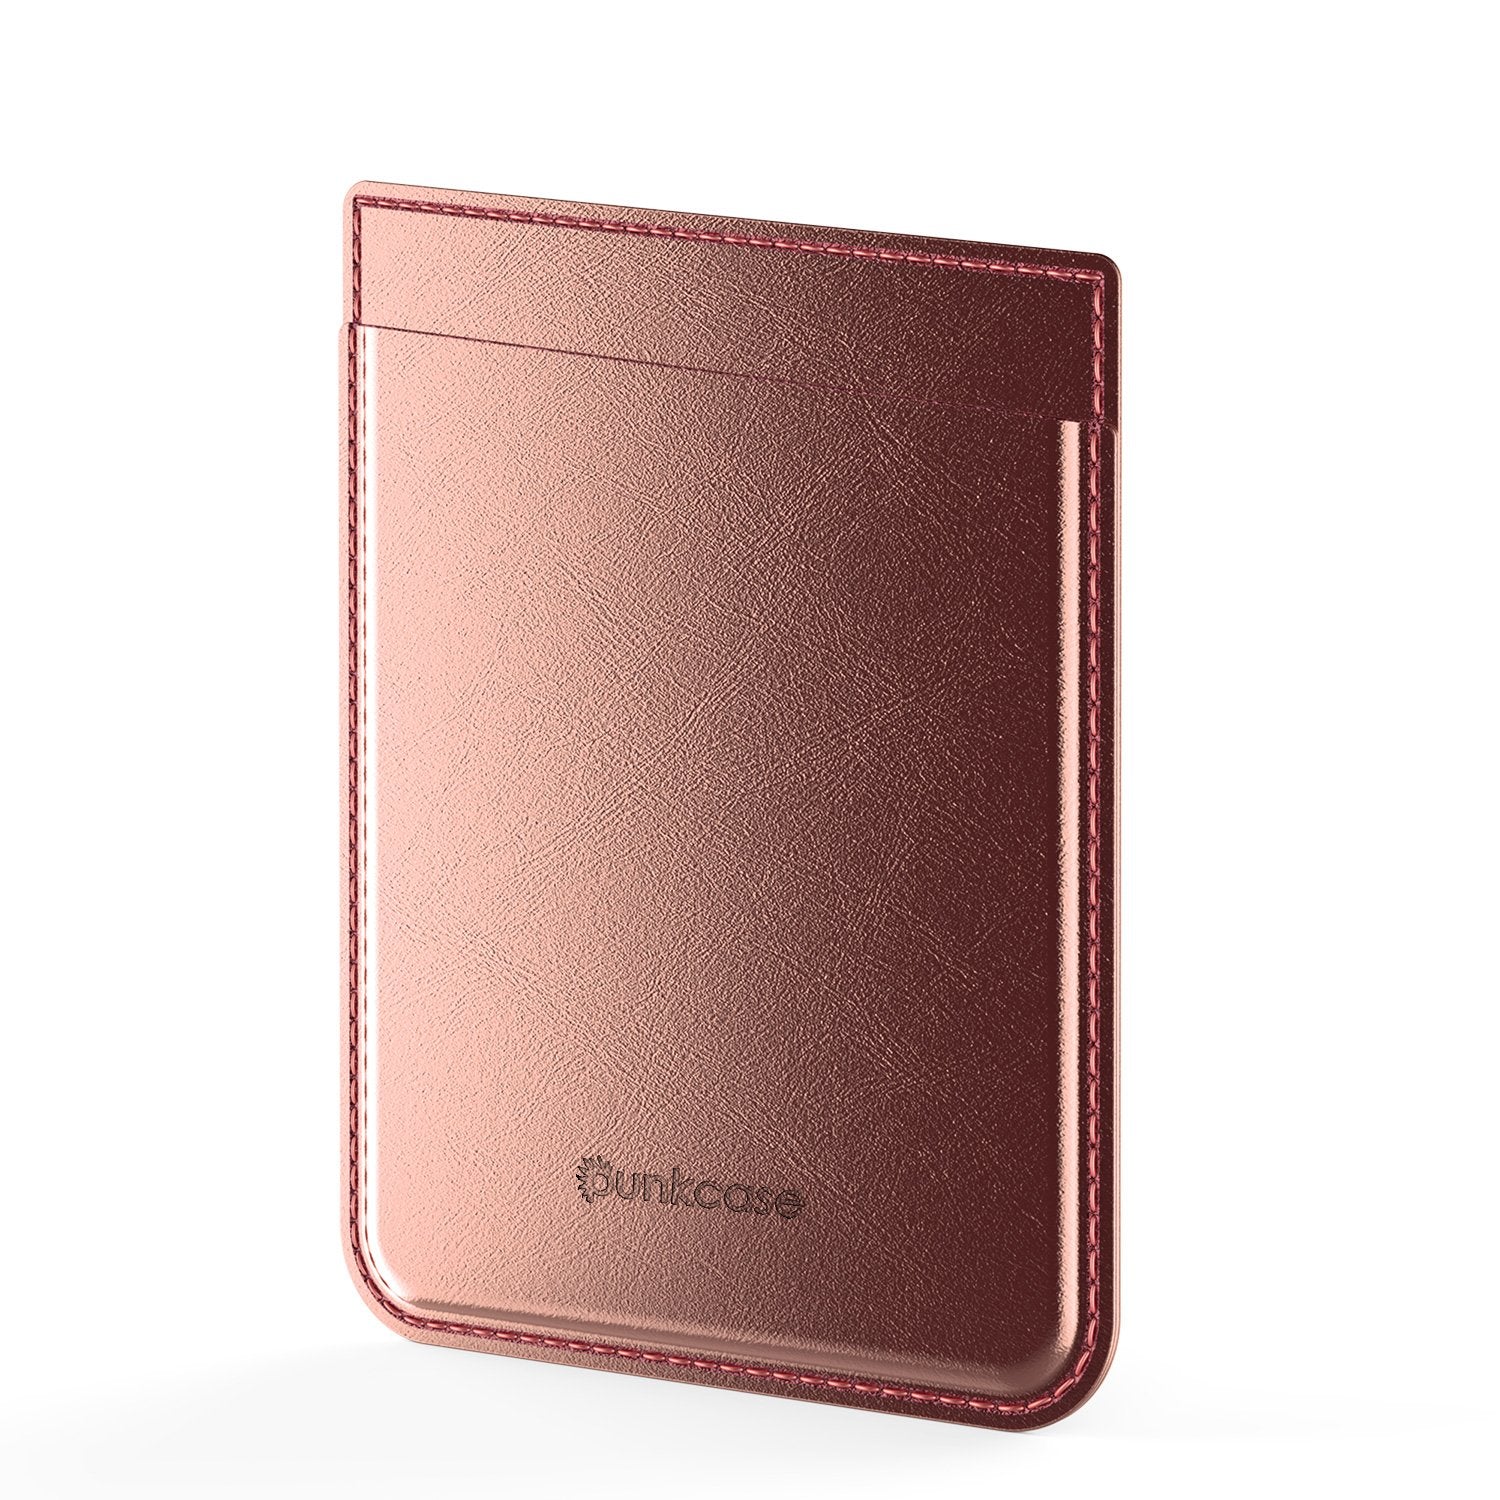 PunkCase CardStud Deluxe Stick On Wallet | Adhesive Card Holder Attachment for Back of iPhone, Android & More | Leather Pouch | [RoseGold] - PunkCase NZ